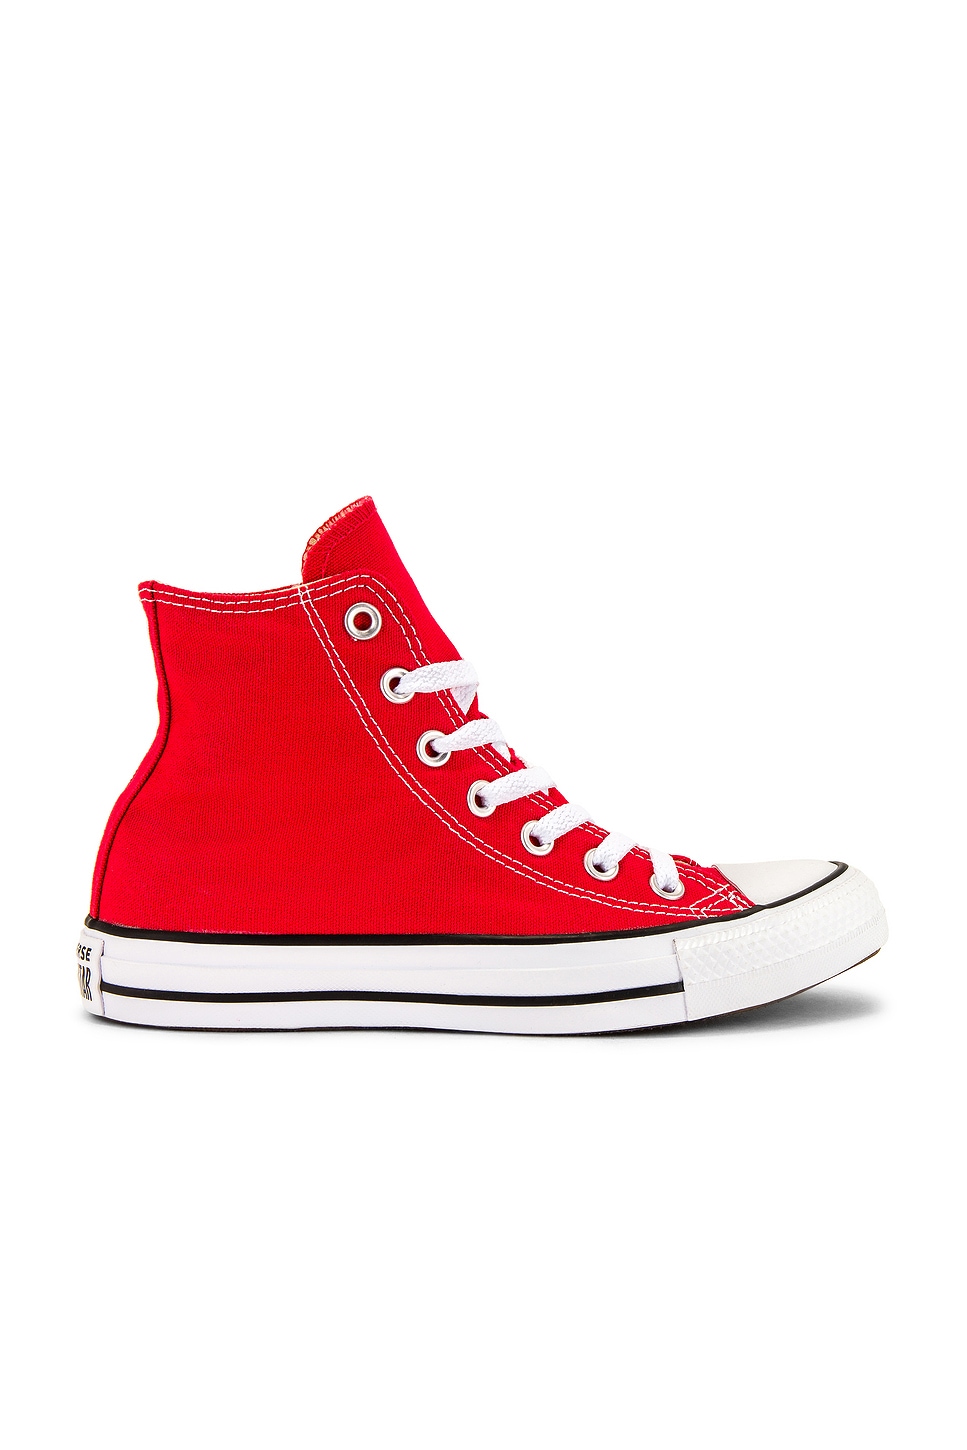 Image 1 of Converse Chuck Taylor All Star Hi Sneaker in Red